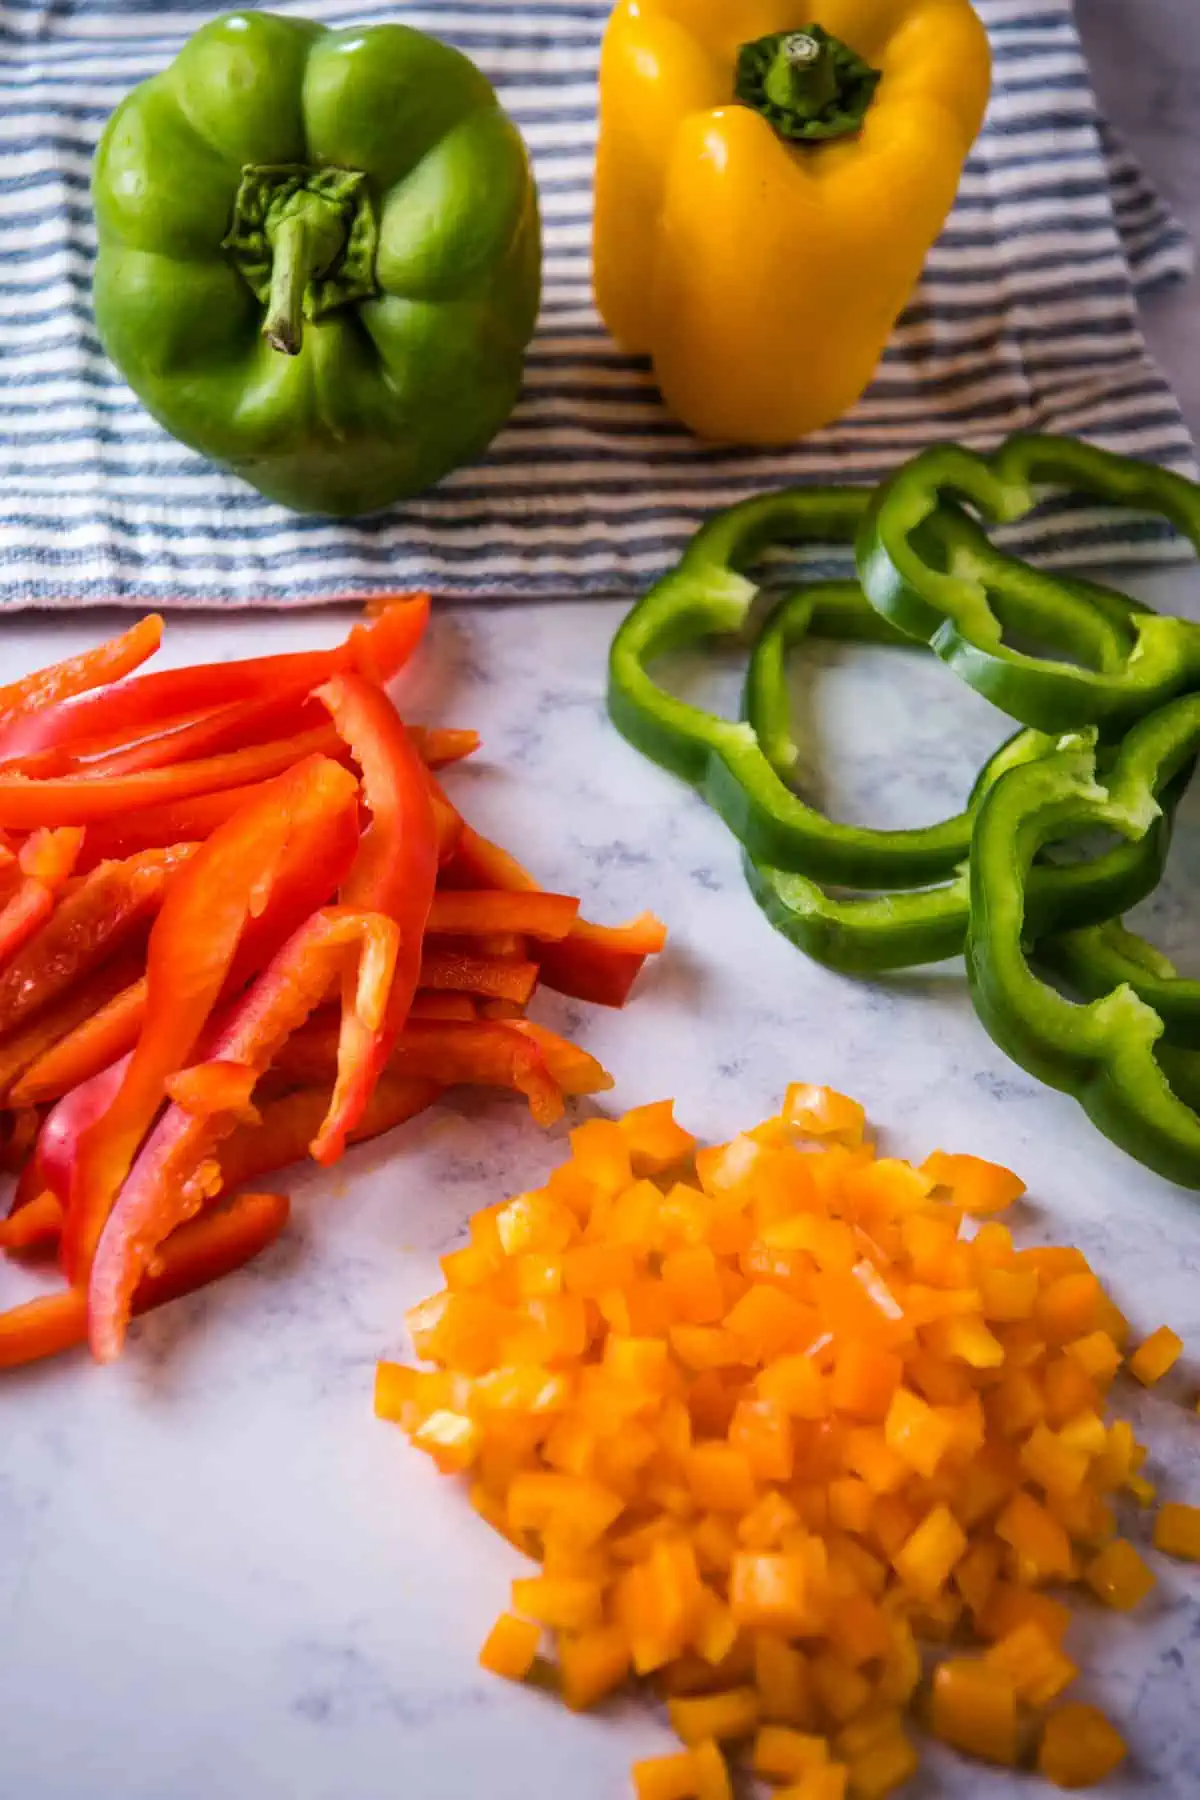 how to cut bell peppers by slicing or julienne, dicing, or rings on white marble countertop with blue striped towel